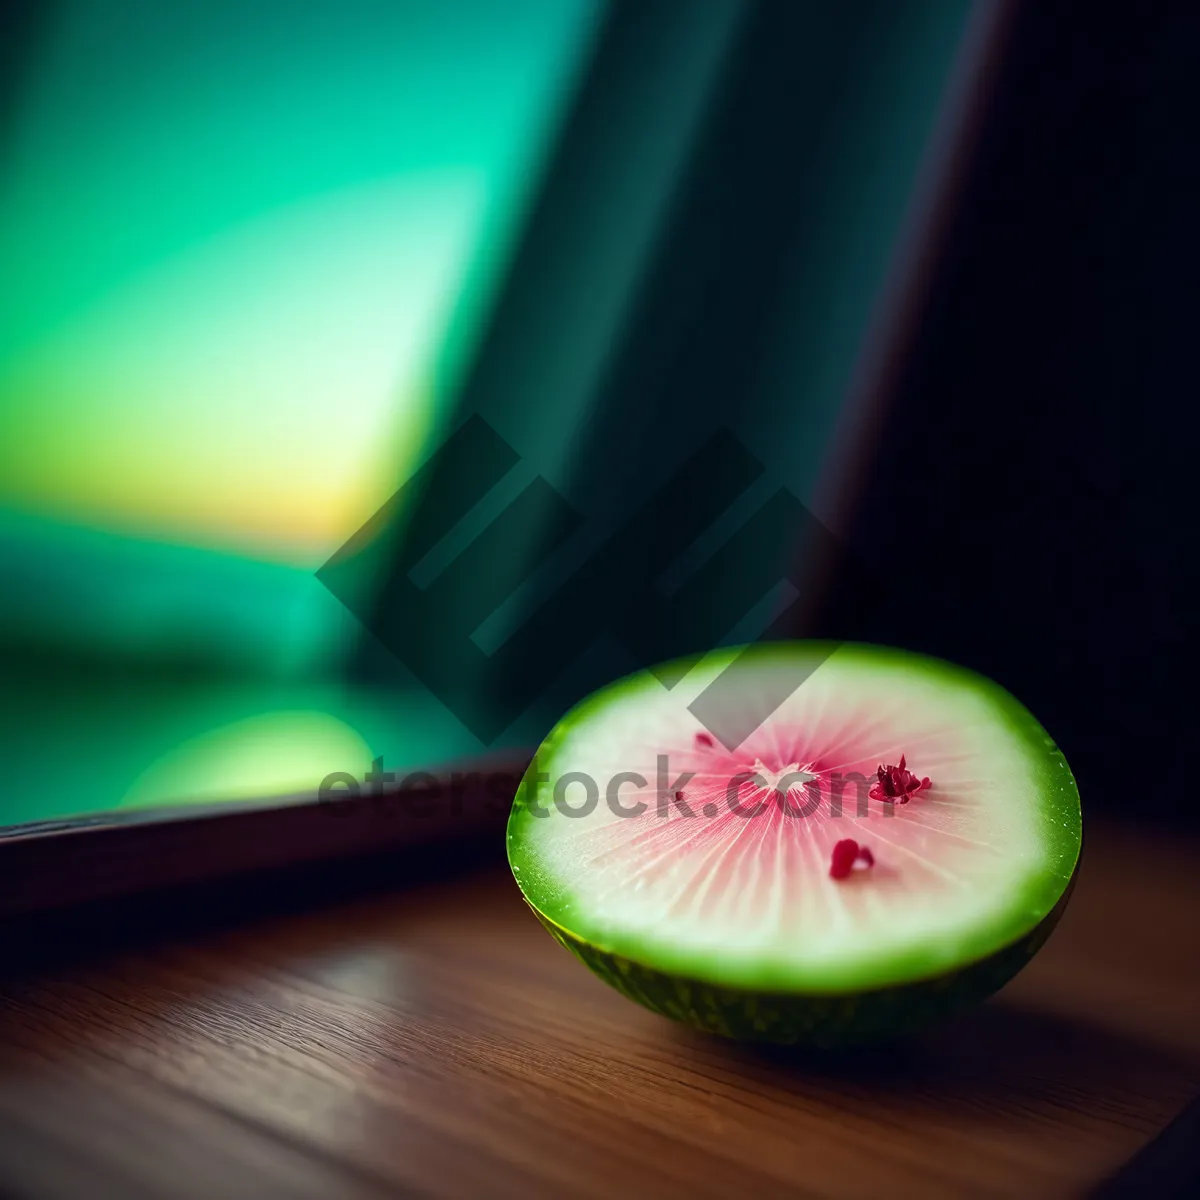 Picture of Juicy Watermelon Slice - Fresh and Healthy Summer Snack